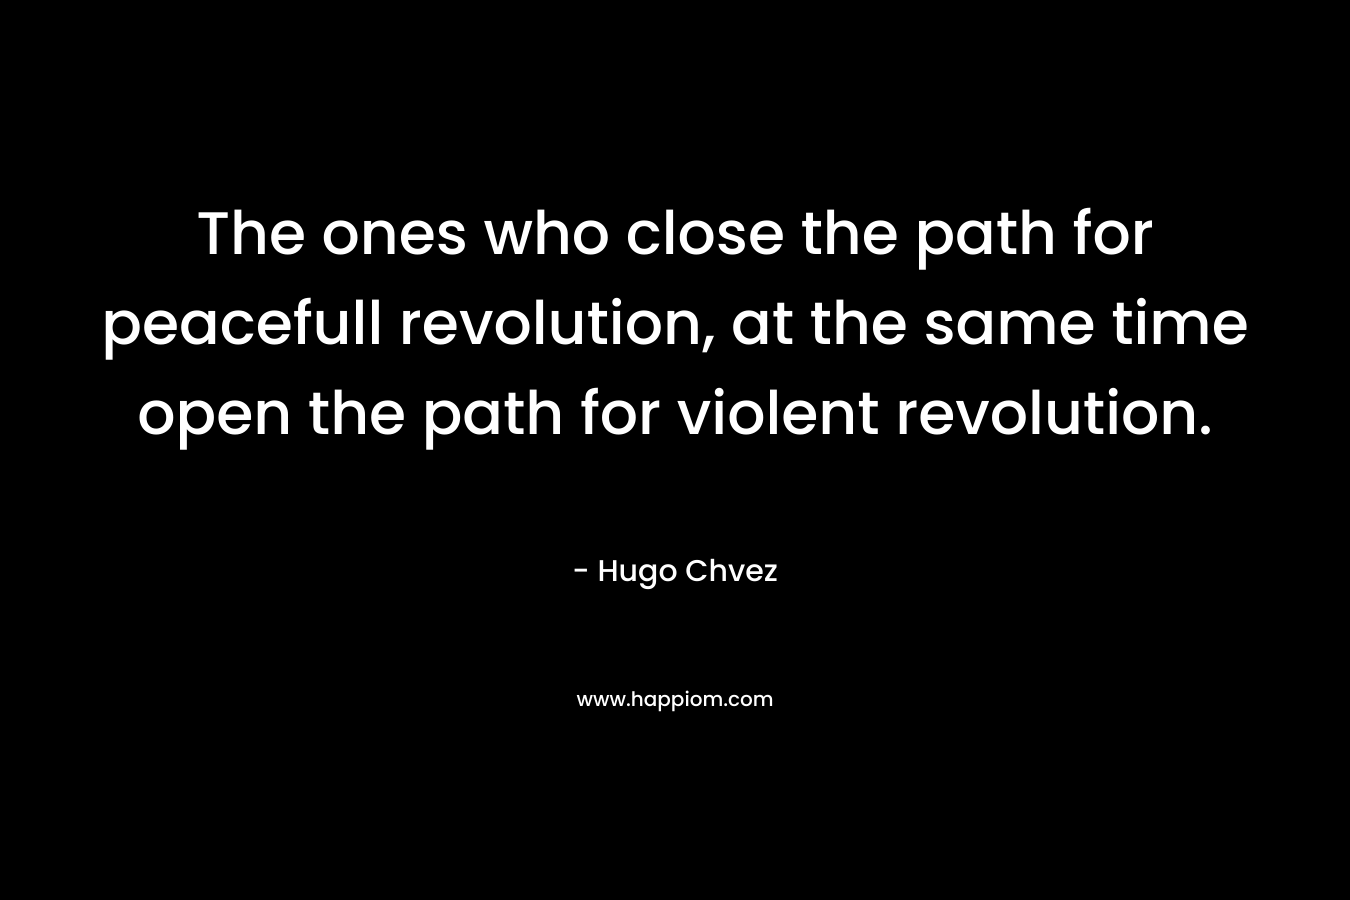 The ones who close the path for peacefull revolution, at the same time open the path for violent revolution. – Hugo Chvez